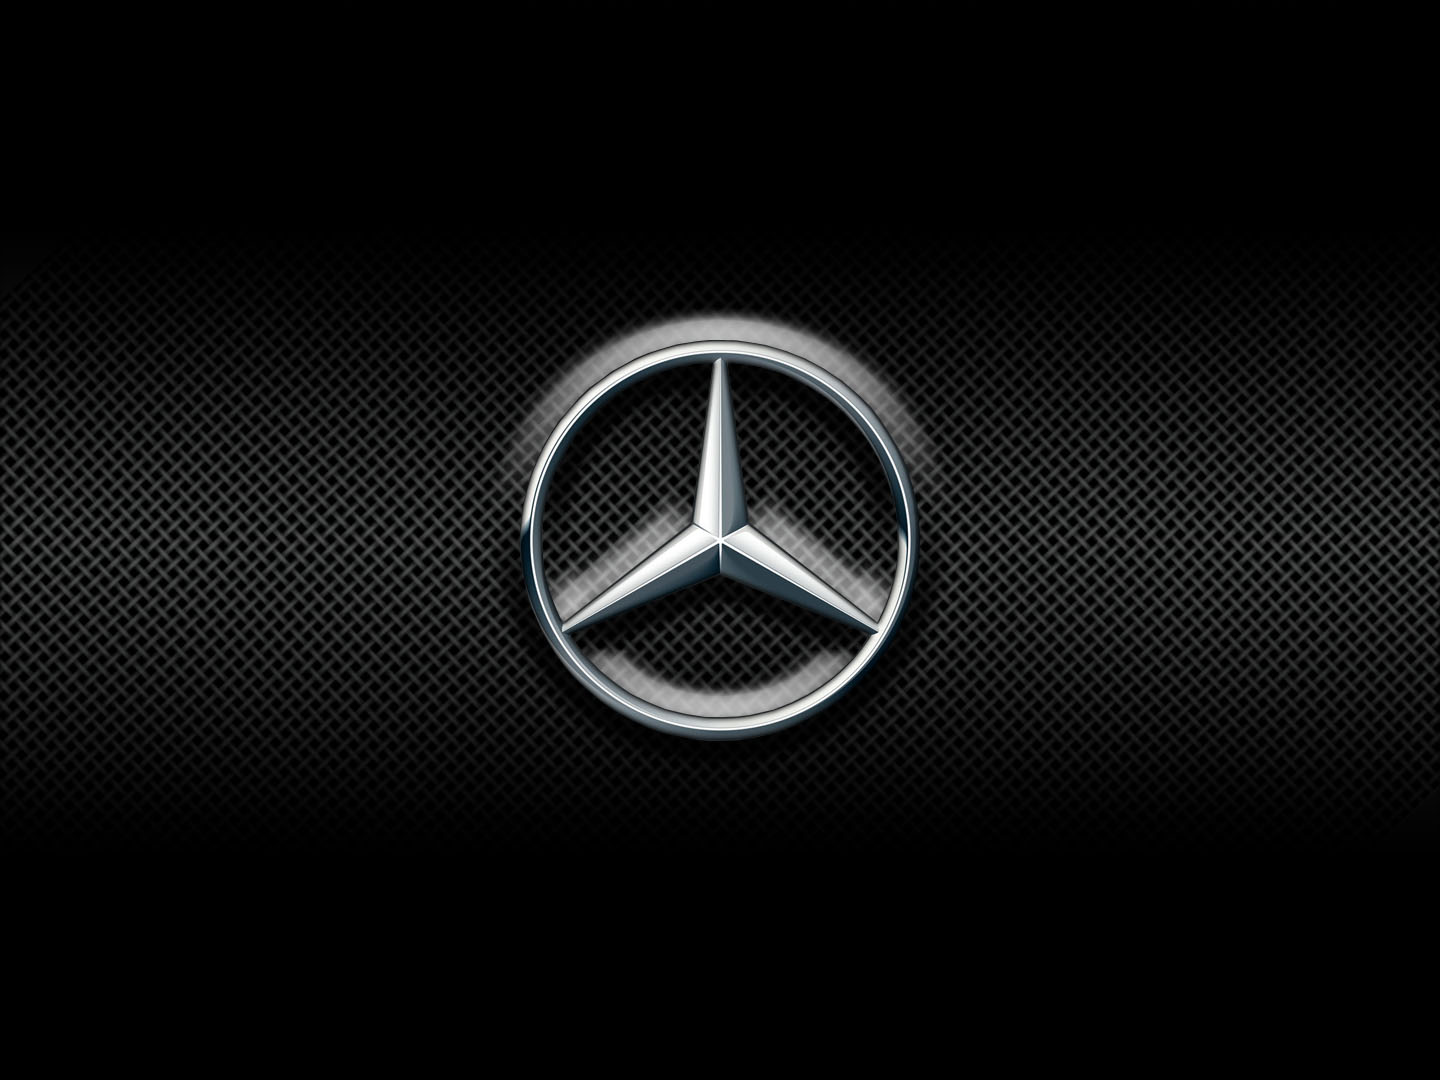 Mercedes Logo, Mercedes Benz Car Symbol Meaning And History Car